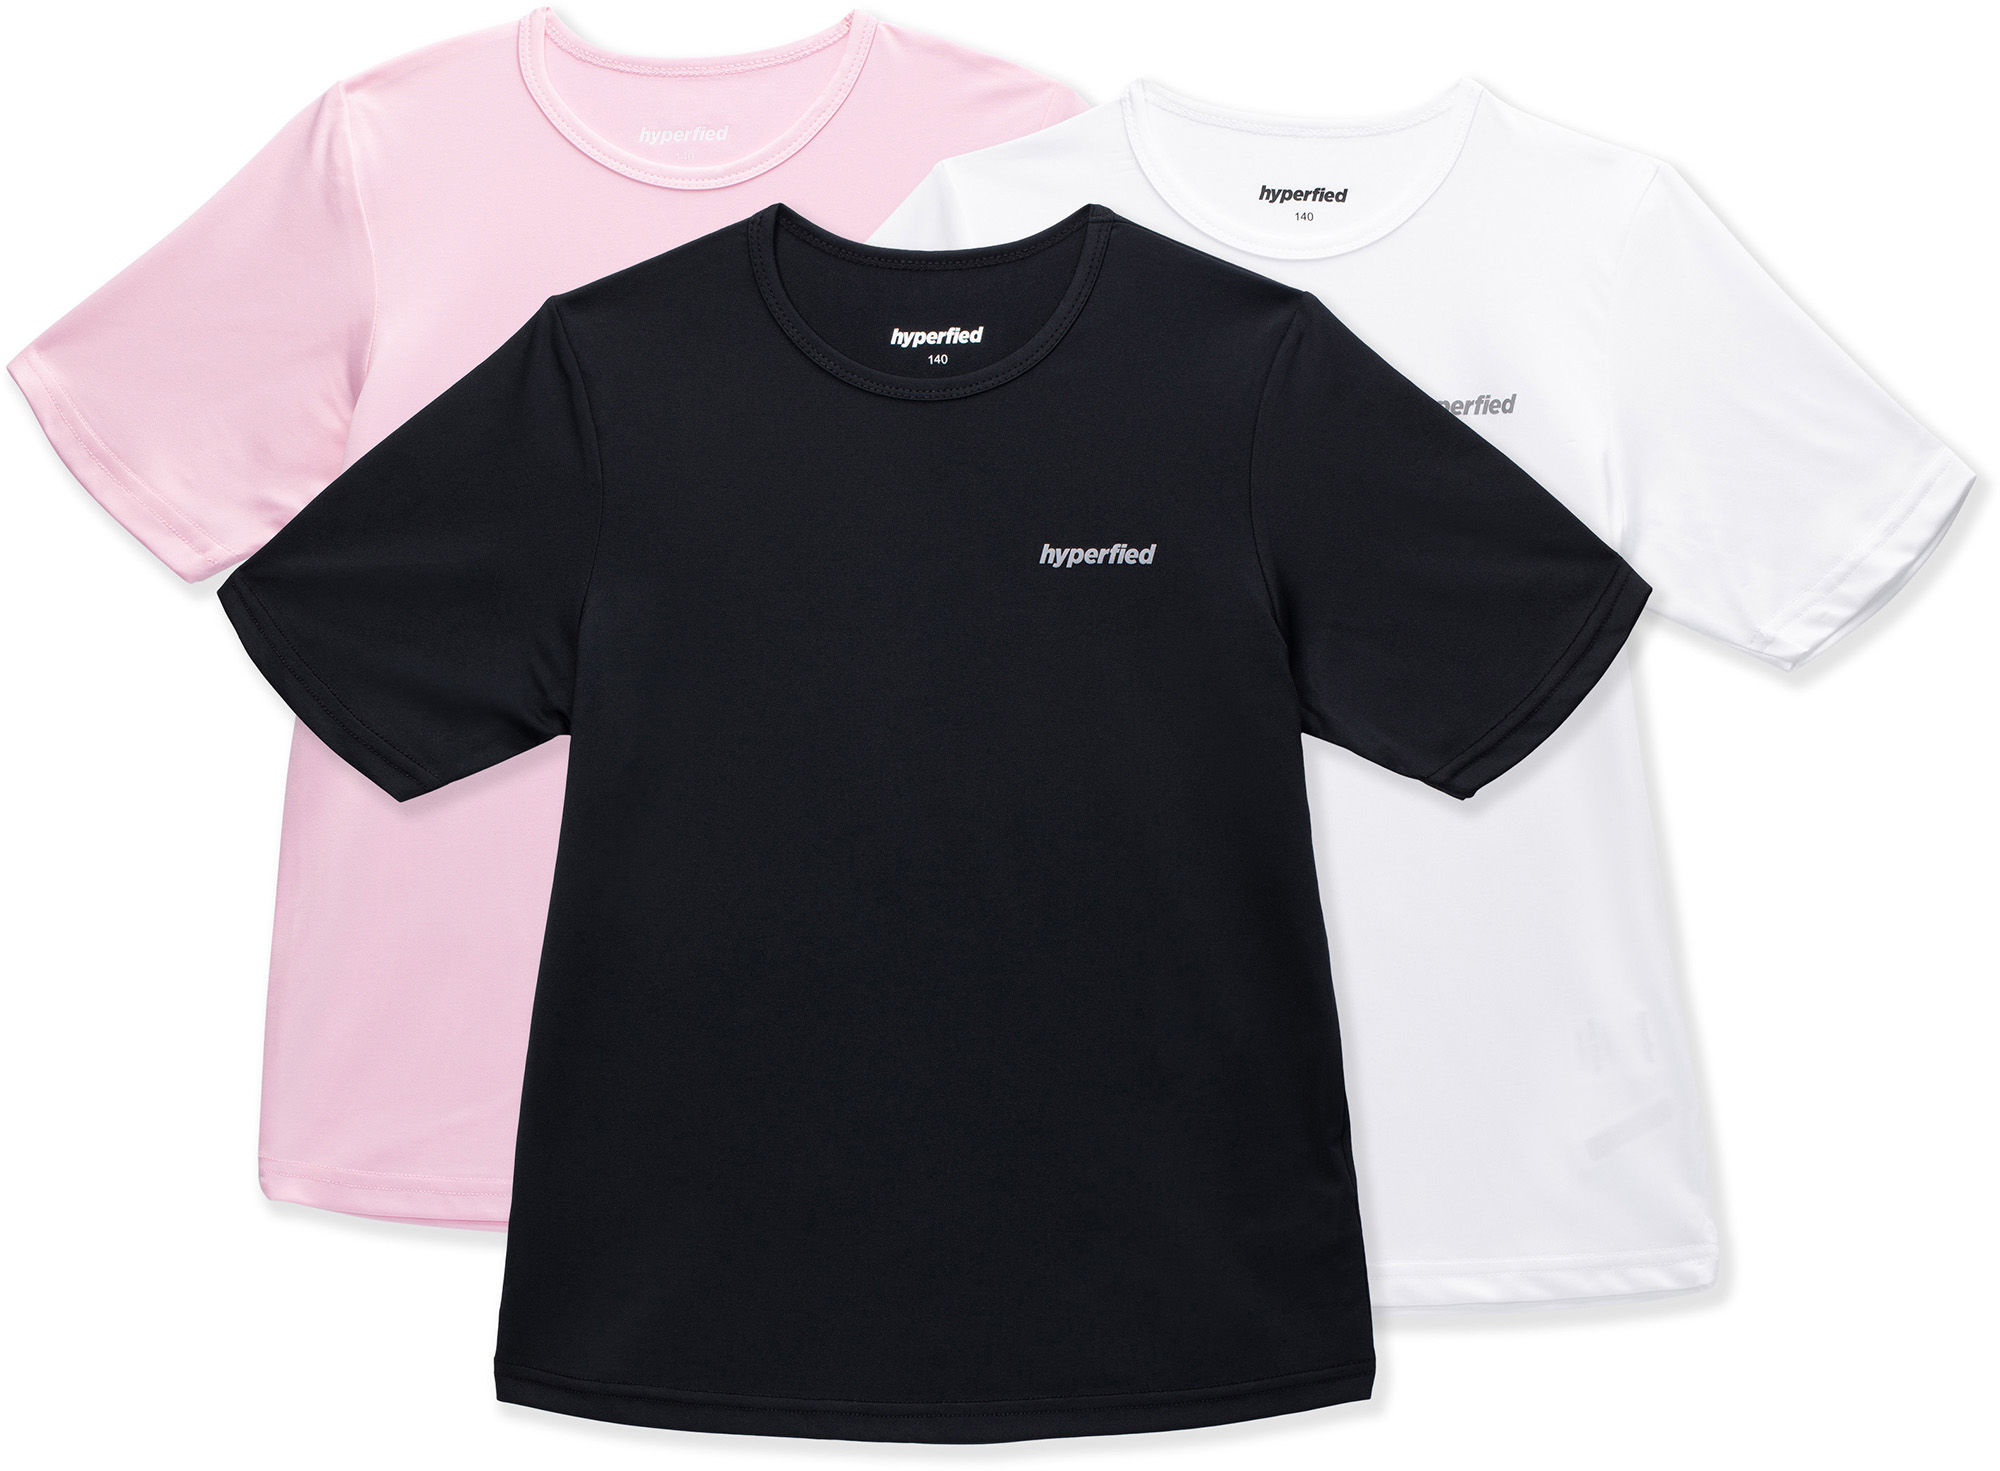 Hyperfied Wave T-Shirt 3-pack Black/White/Fairy Tale 170